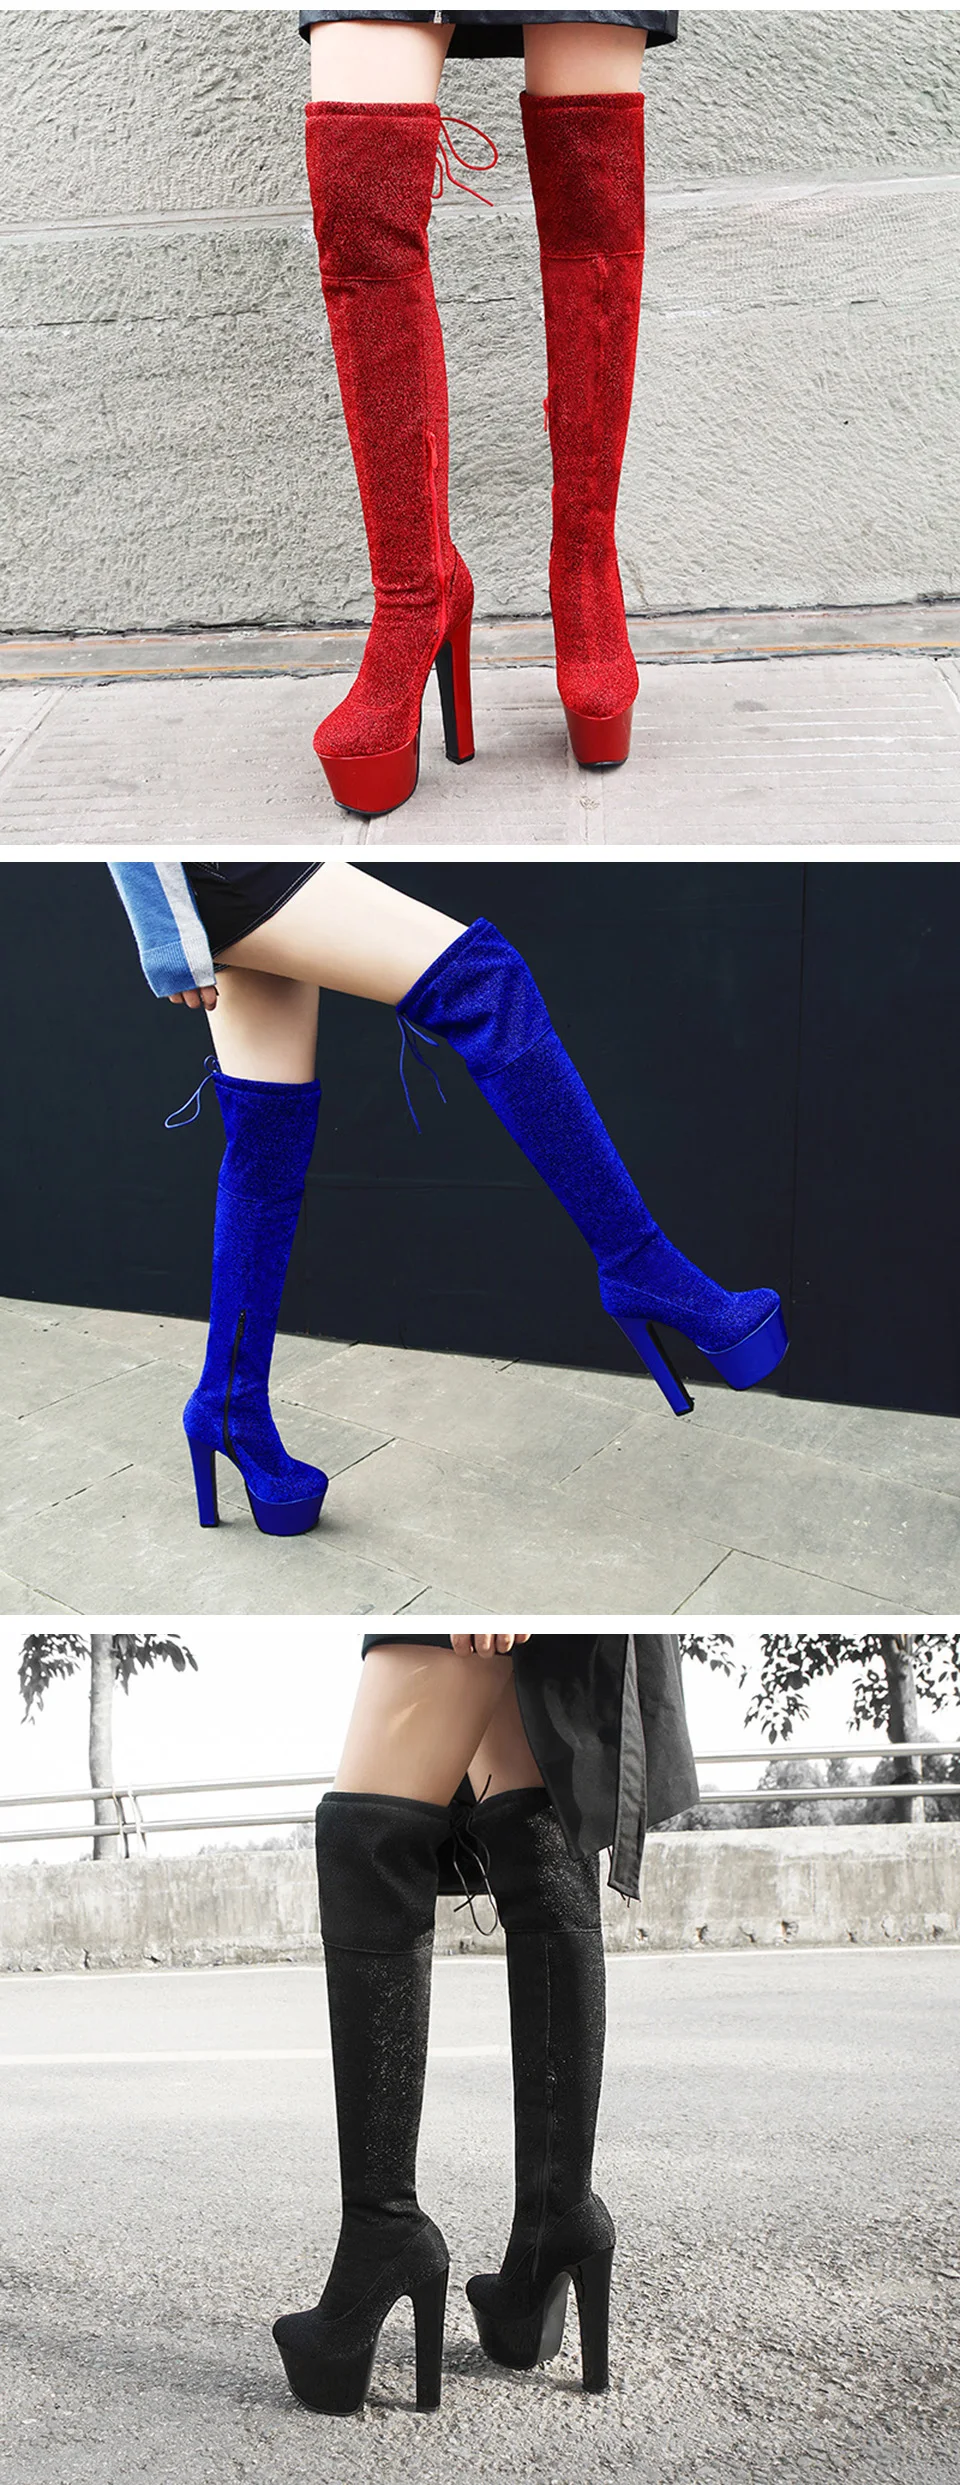 Women Boots Warm Snow Shoes High Heel Over The Knee Boots Thick Waterproof Platform Boots Woman Plush Slip On Fashion Plus Size